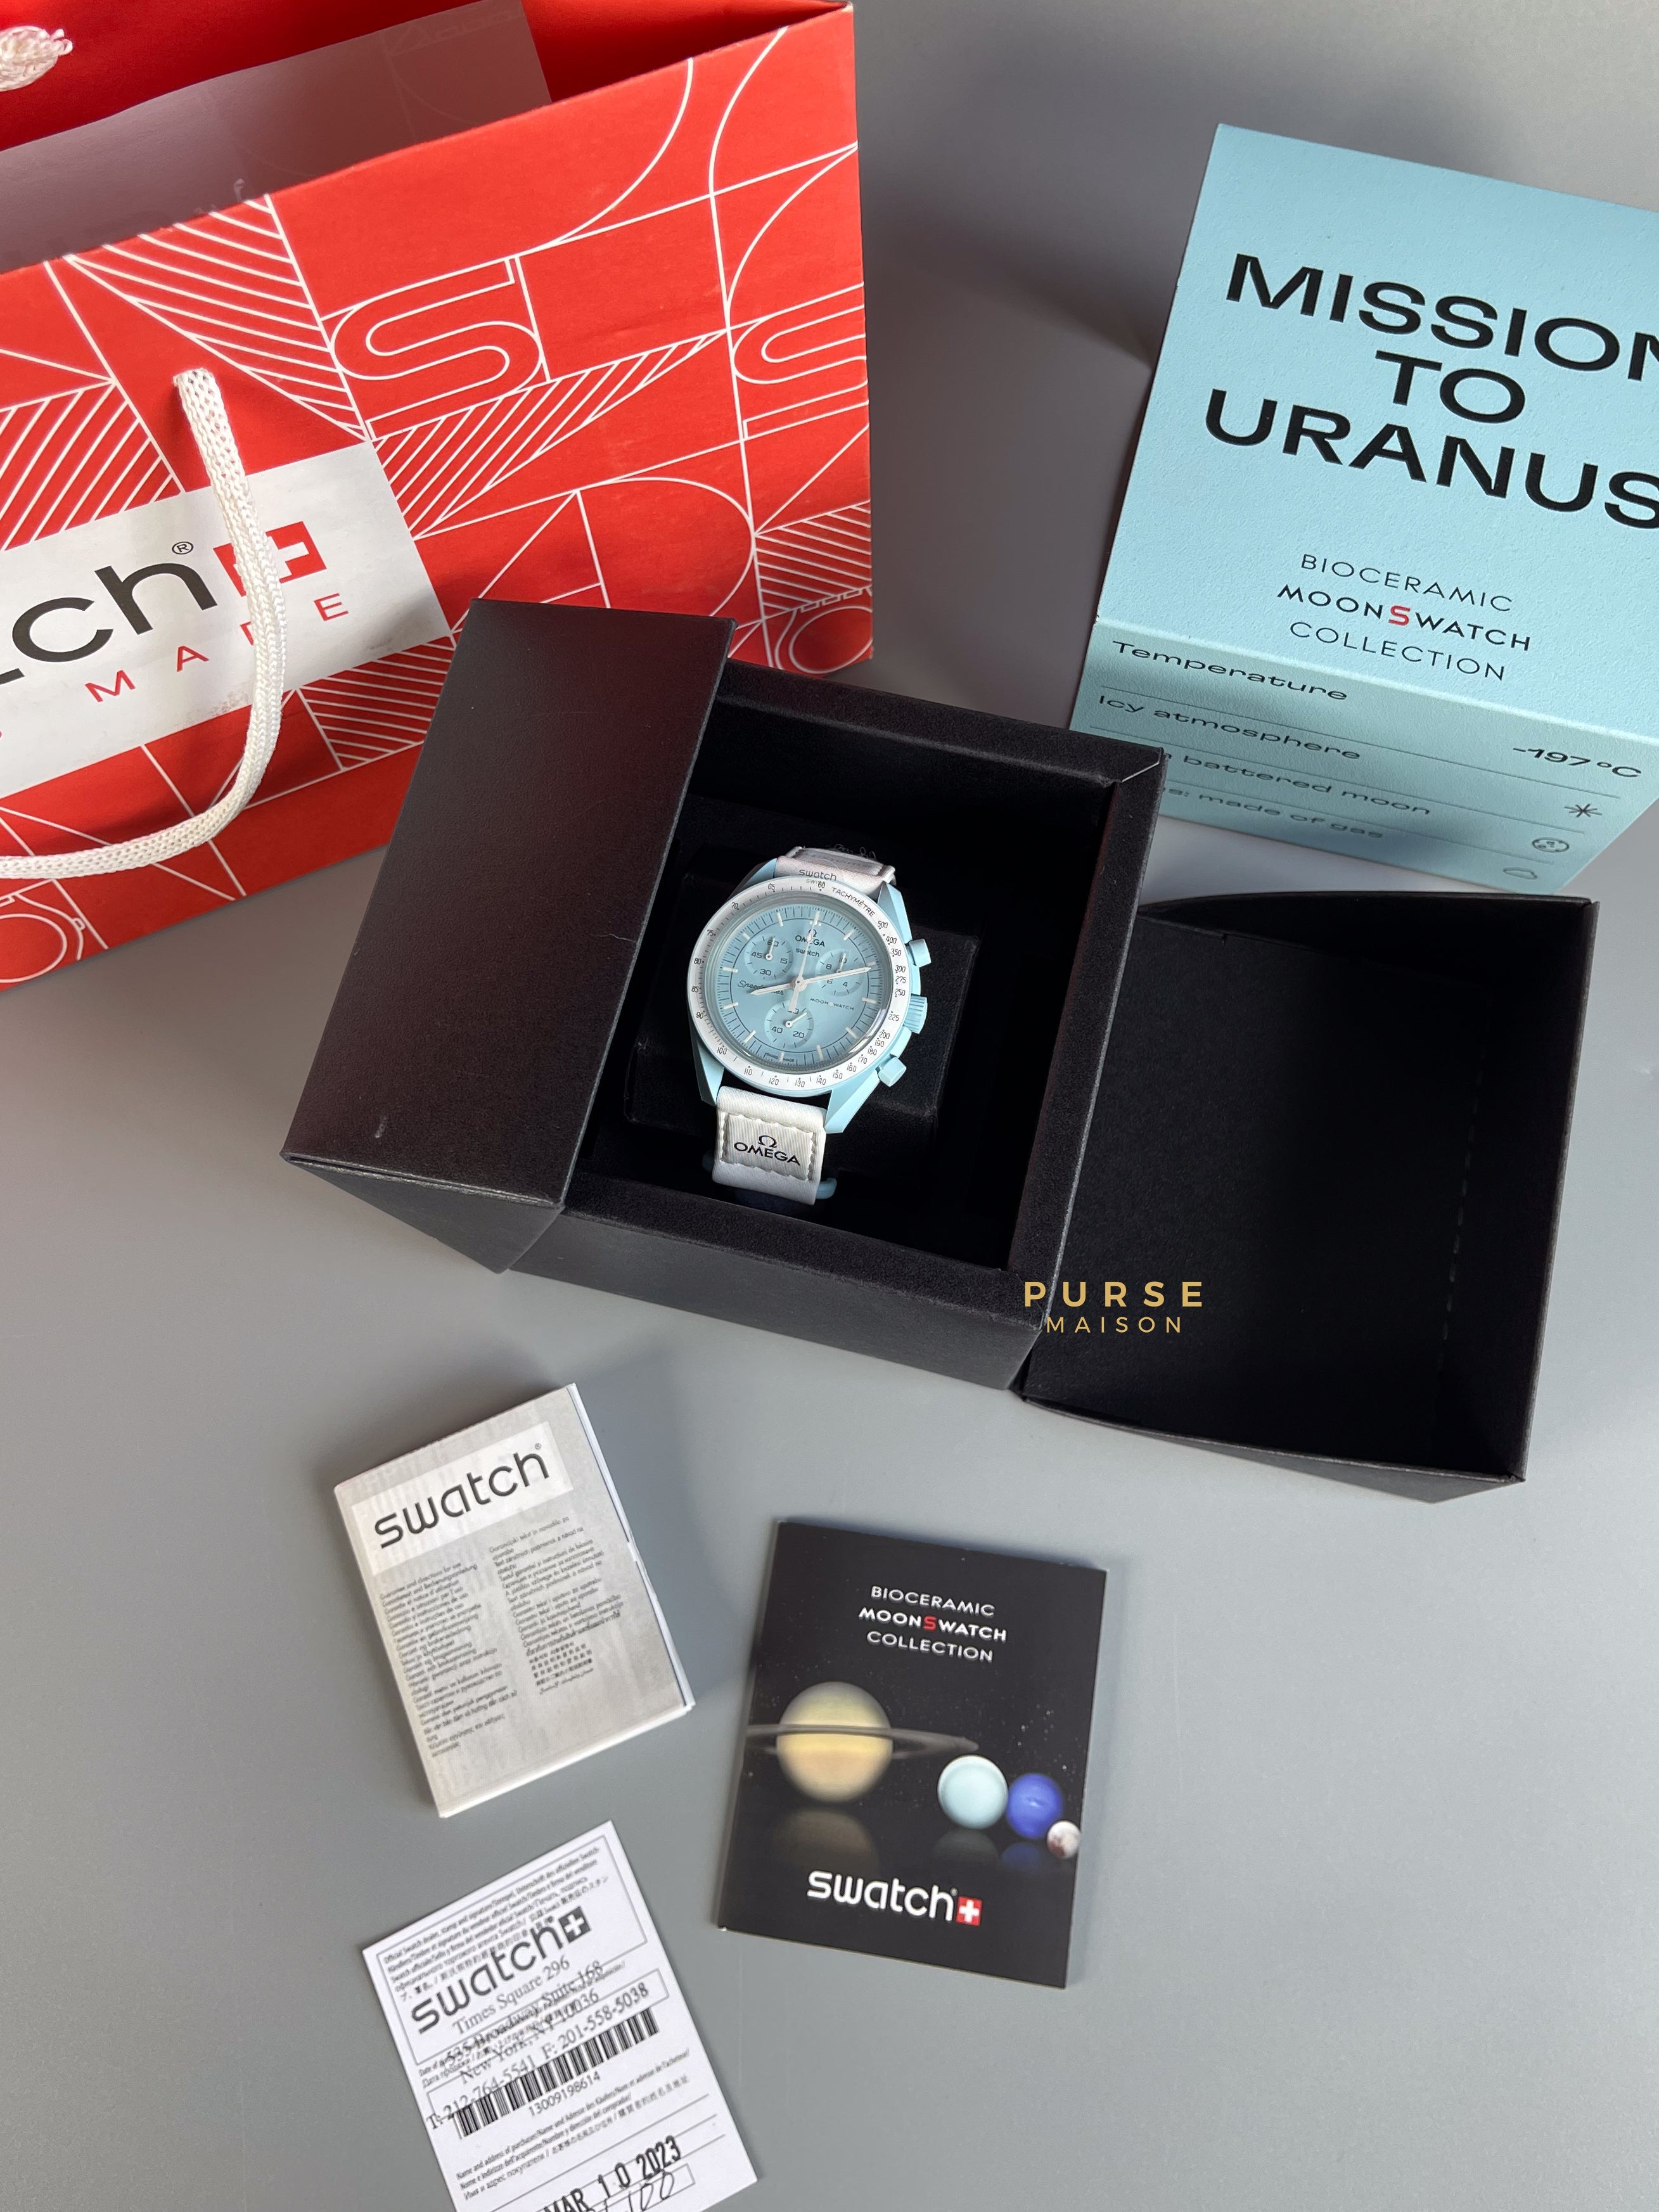 Omega x Swatch Bioceramic MoonSwatch Collection Mission to Uranus | Purse Maison Luxury Bags Shop